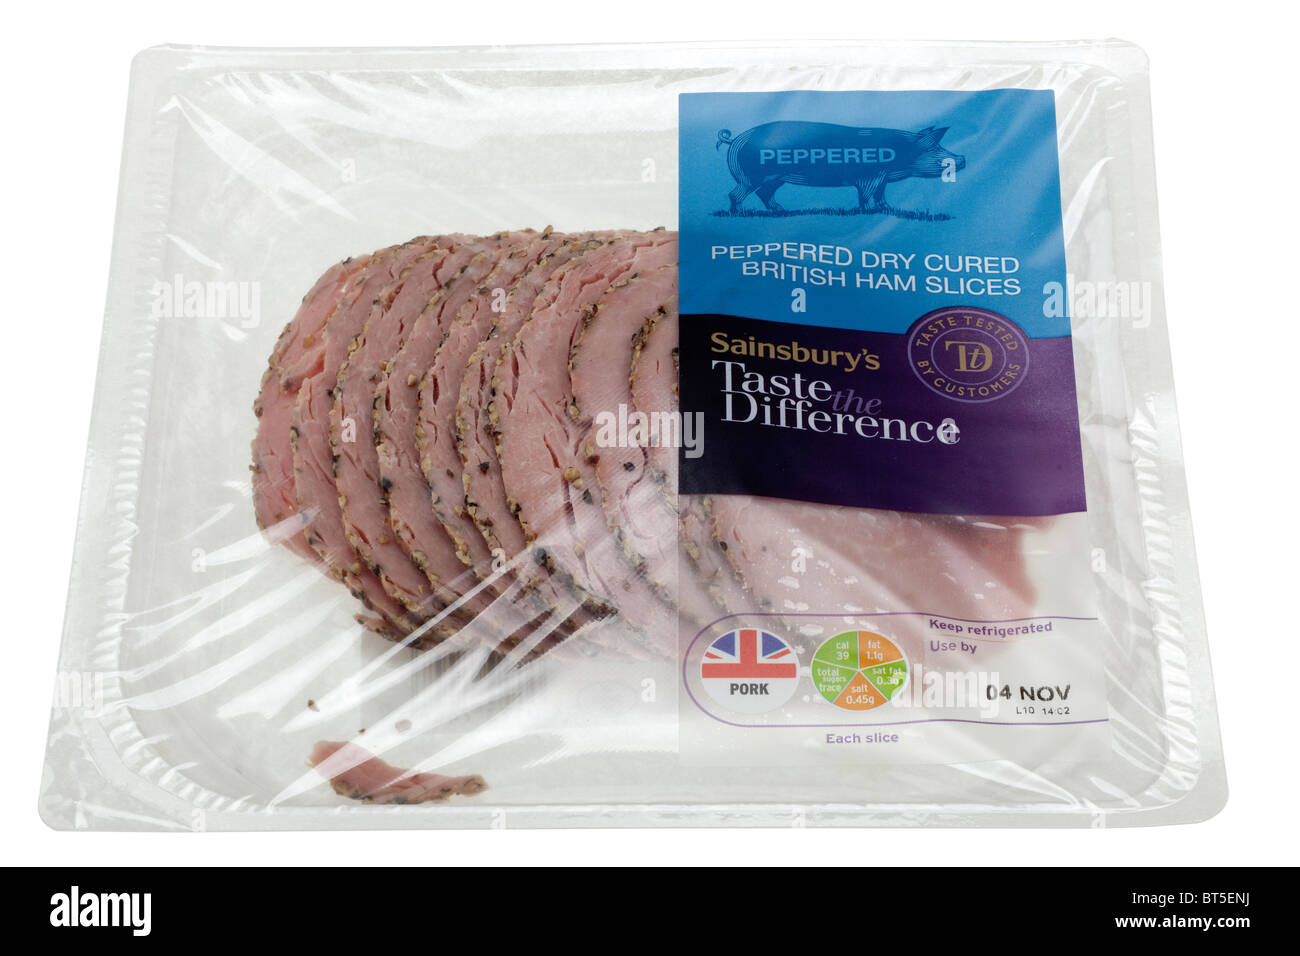 Sainsburys taste the difference peppered dry cured British ham slices in a cellophane sealed packet Stock Photo